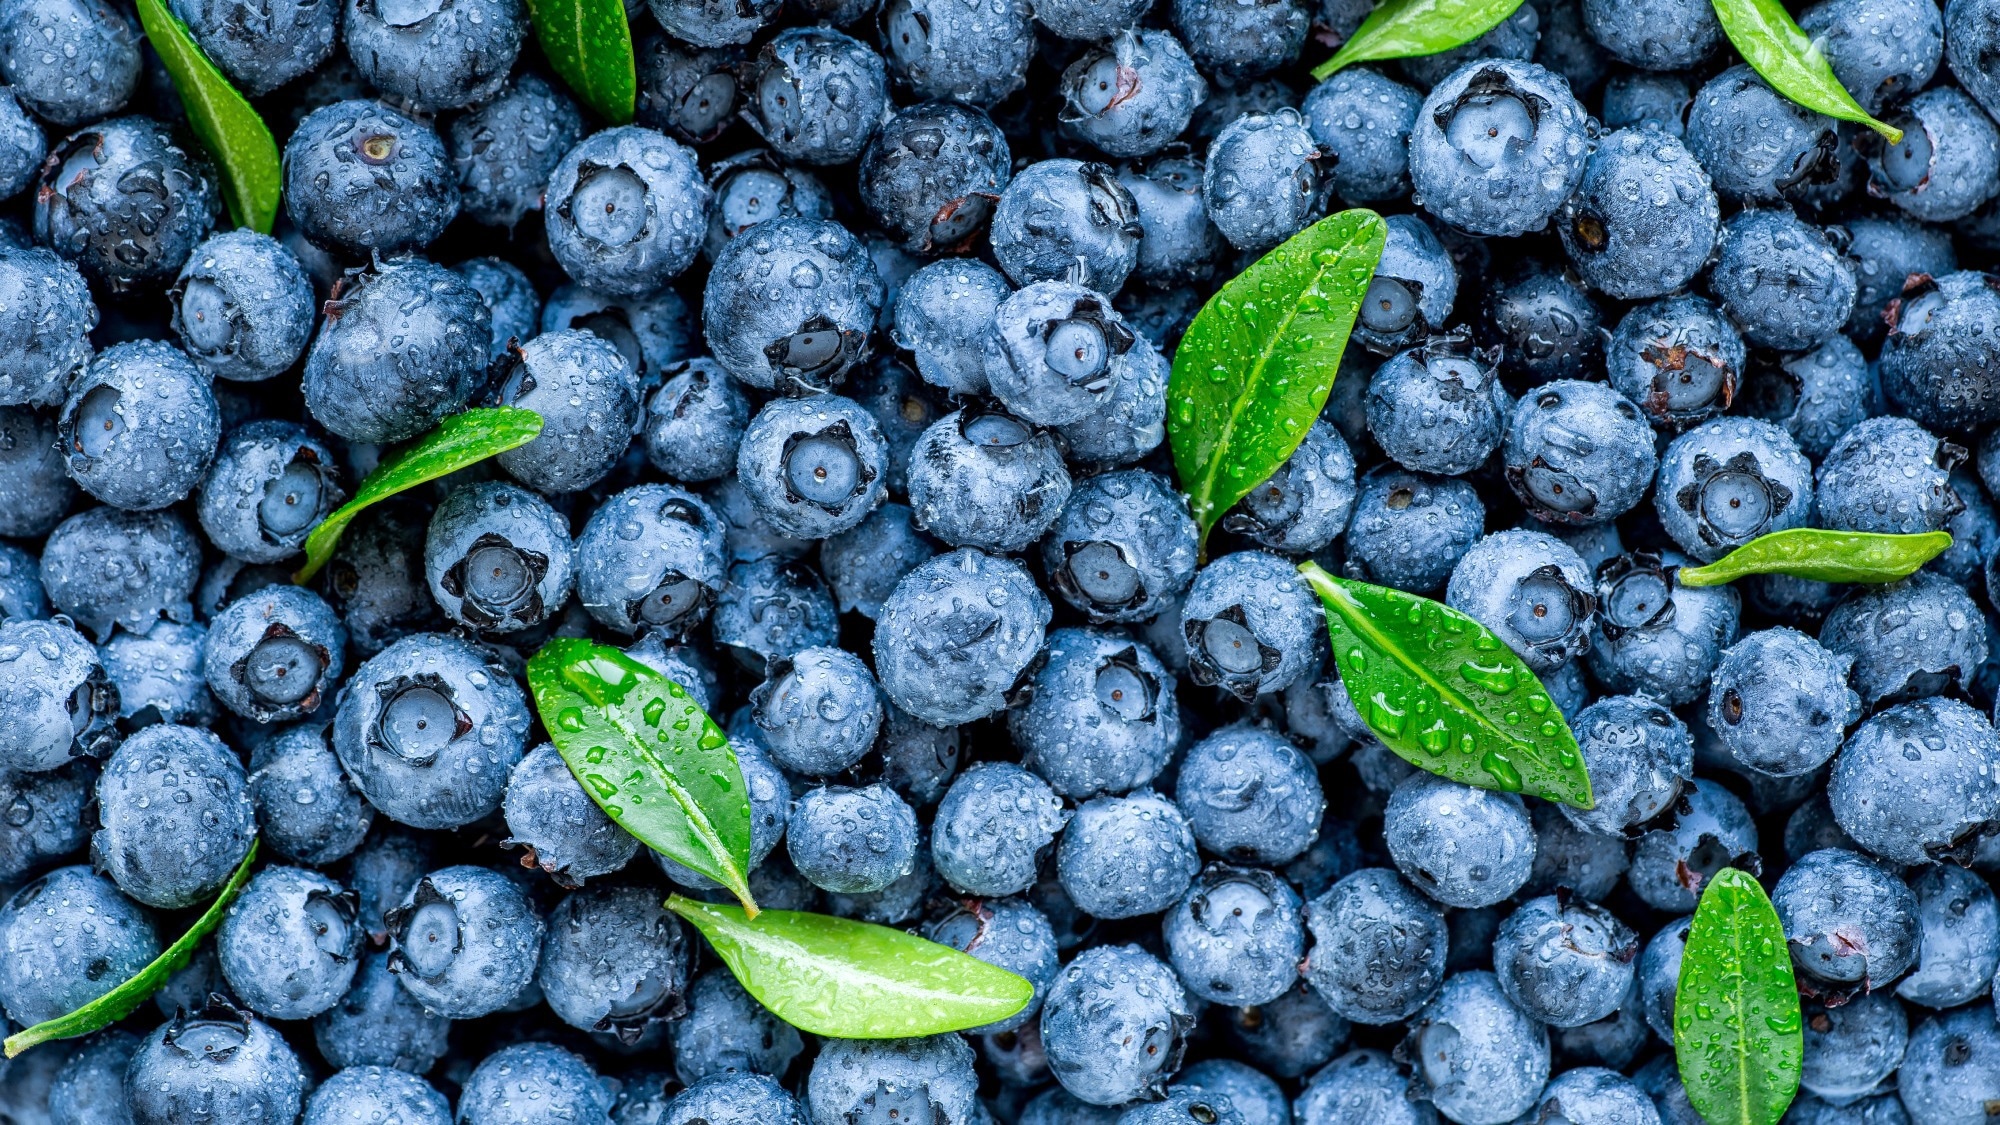 Study: Blueberries Improve Abdominal Symptoms, WellBeing and Functioning in Patients with Functional Gastrointestinal Disorders. Image Credit: Bukhta Yurii / Shutterstock.com